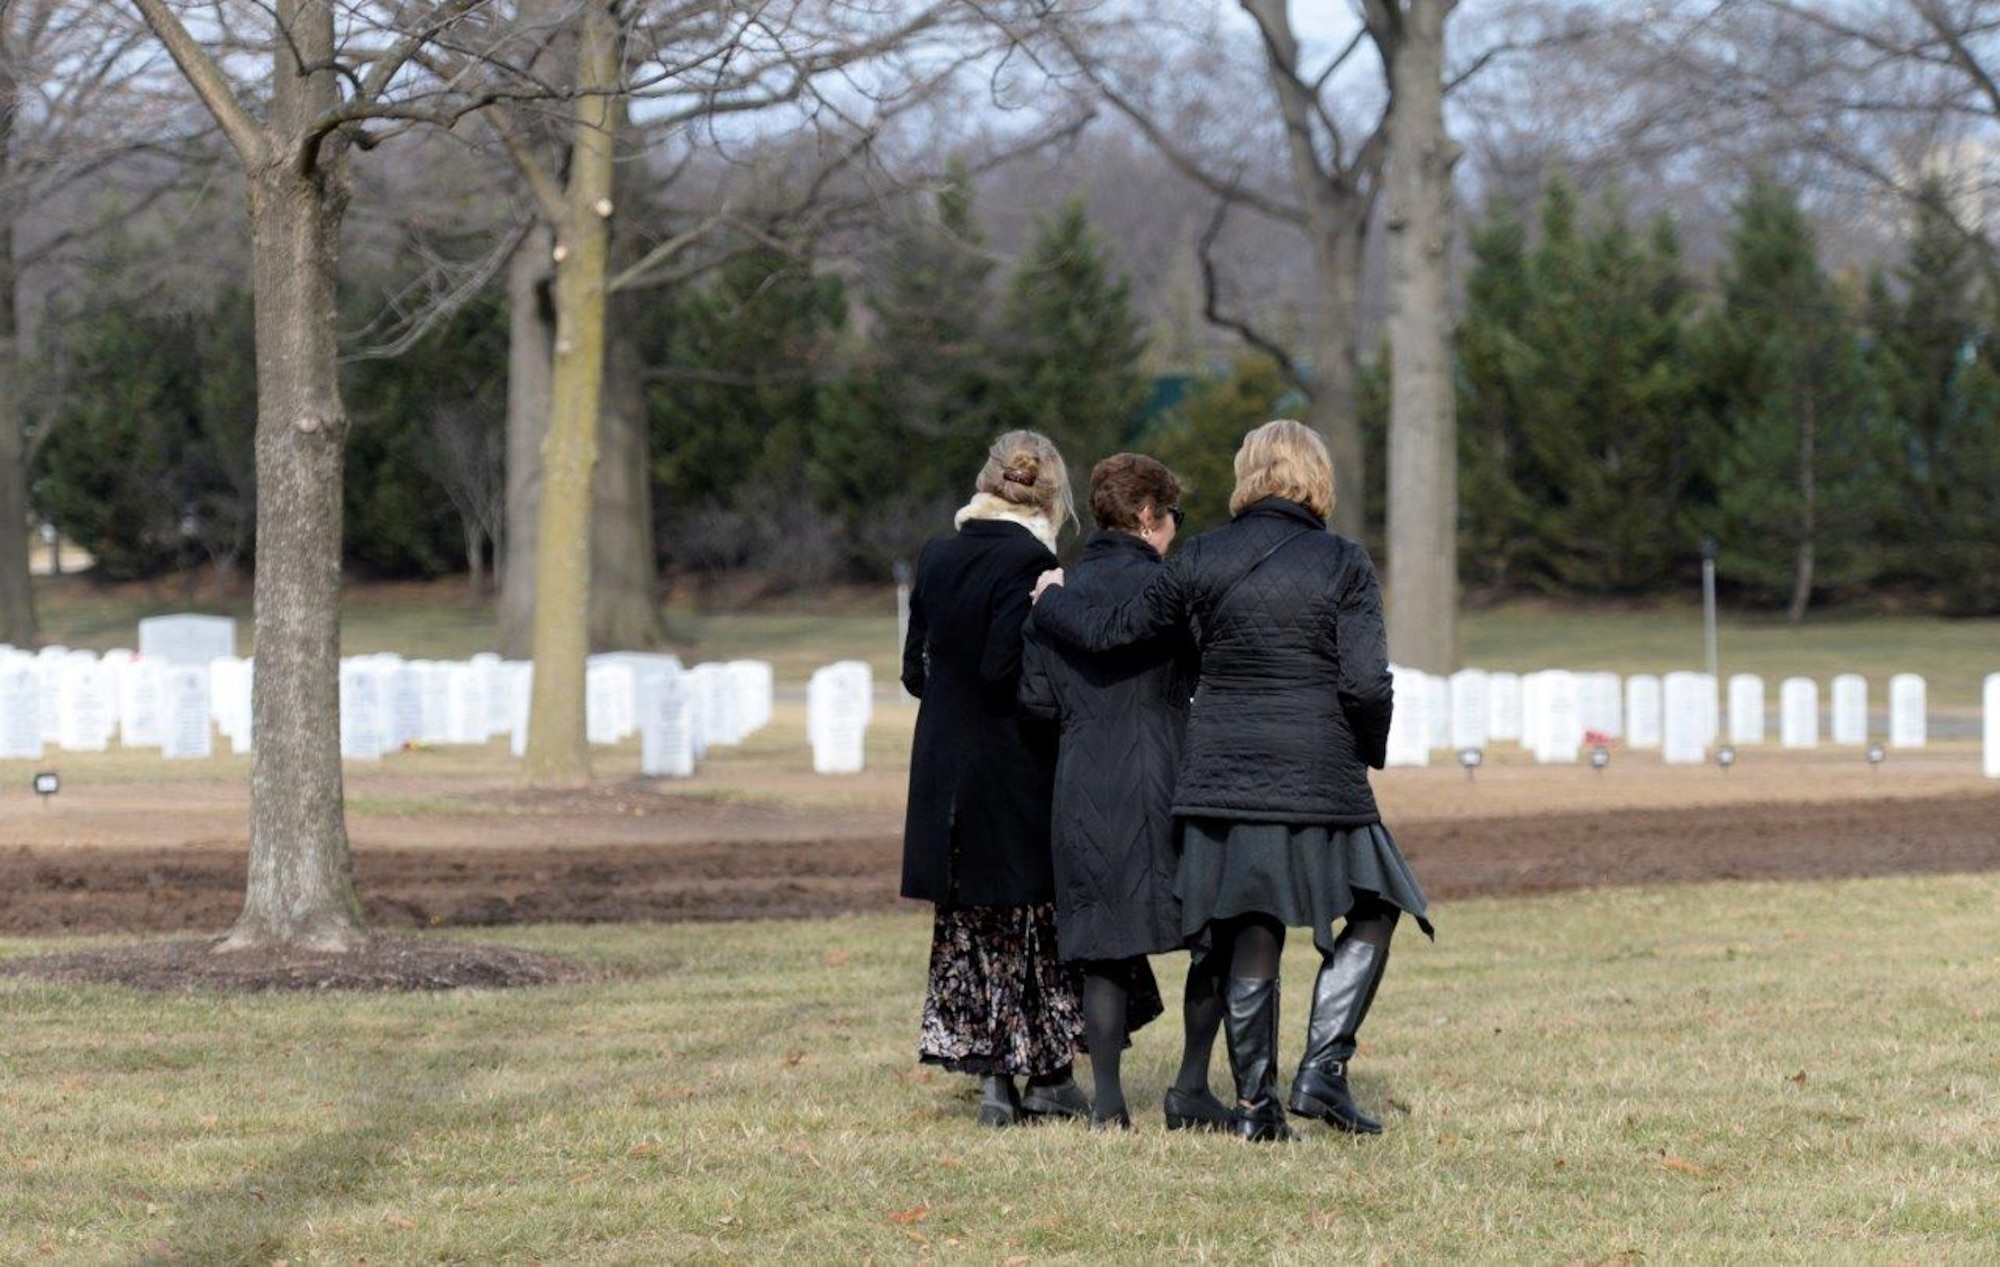 Family and friends pay their final respects to retired Col. Leo Thorsness following his full honors funeral at Arlington National Cemetery, Arlington, Va., Feb. 14, 2018. Thorsness received the Medal of Honor for his heroic actions during the Vietnam War. (U.S. Air Force photo by Staff Sgt. Rusty Frank)